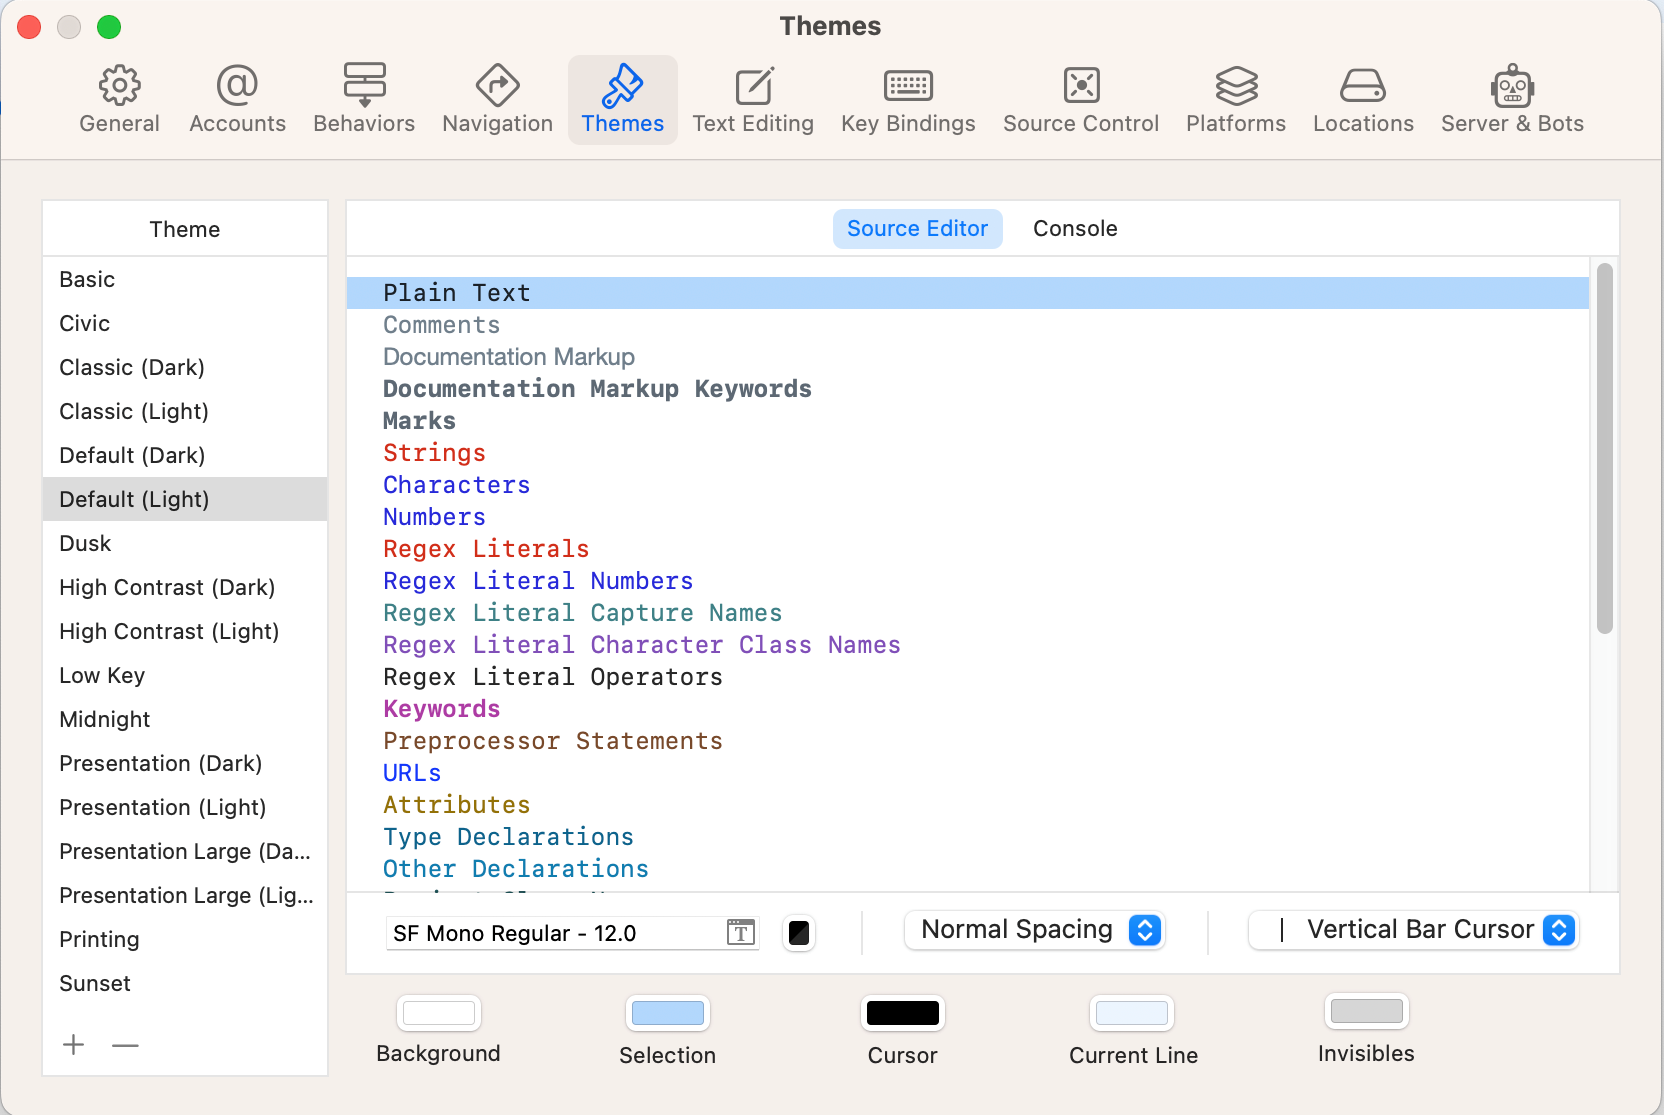 Xcode Settings windows with the Themes pane selected